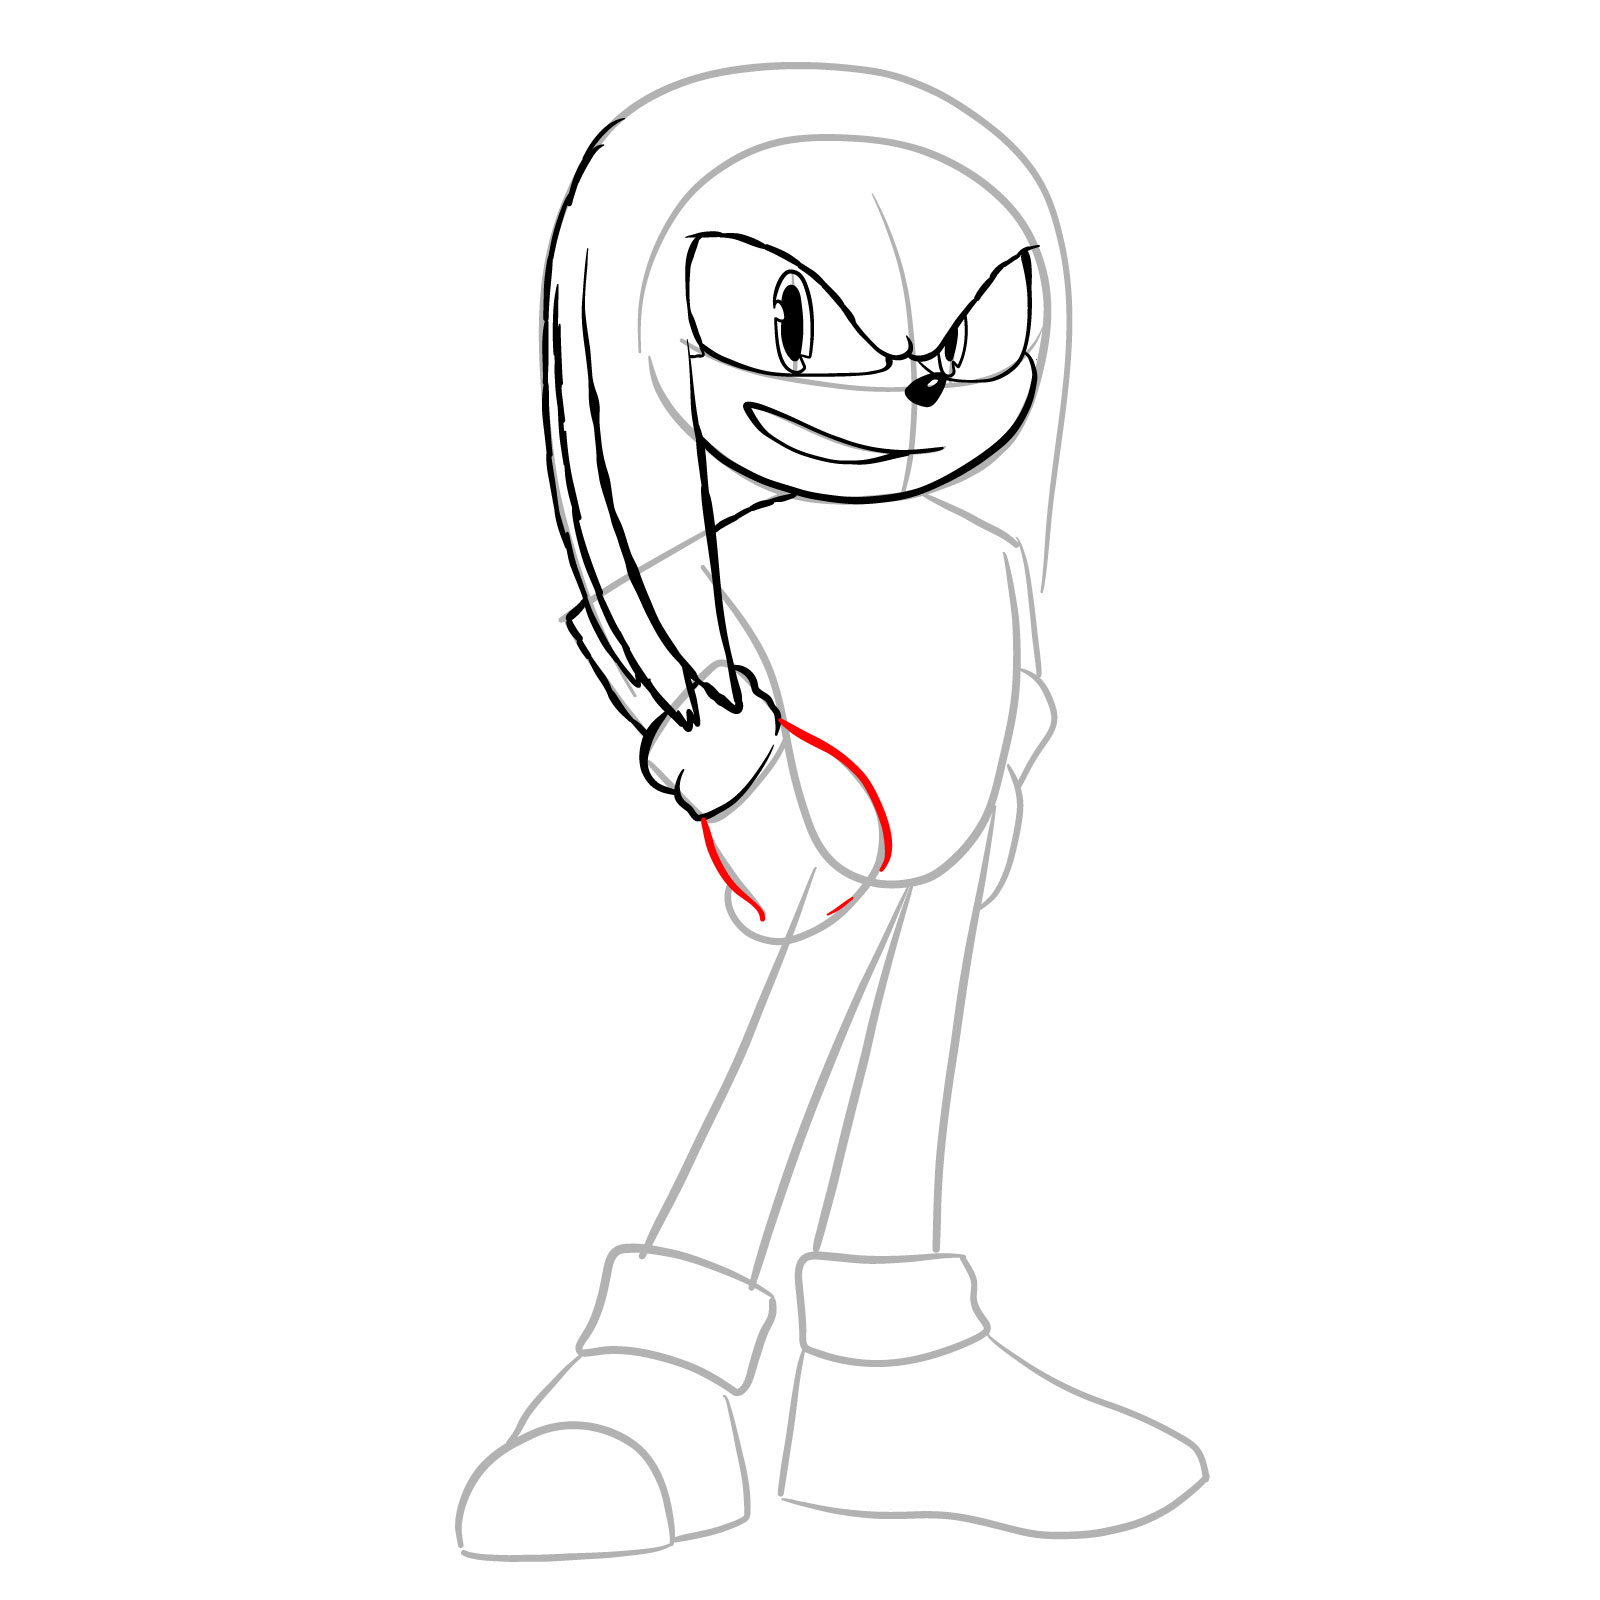 How to draw Knuckles from the movie - step 13